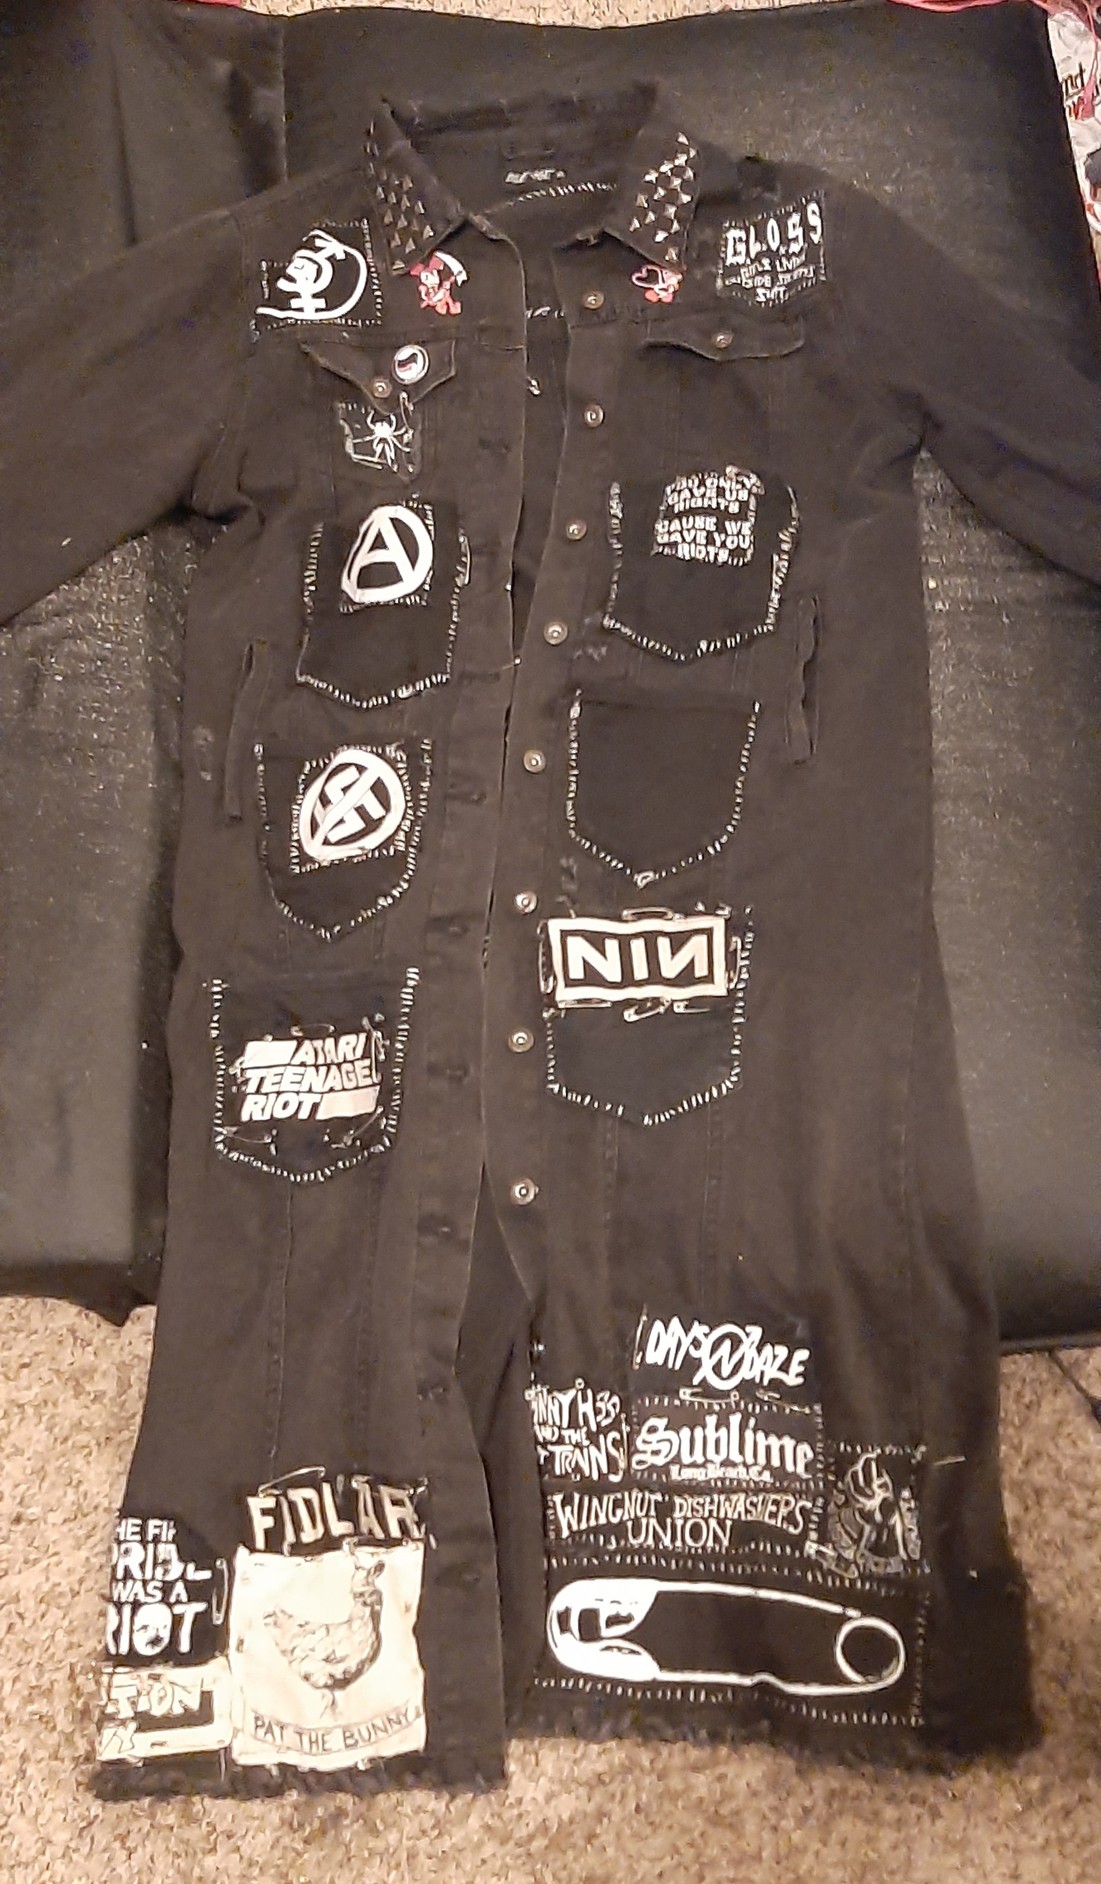 the front of my black denim trenchcoat covered in various pins, studs, and patches. there are six black denim pockets sewn onto the front